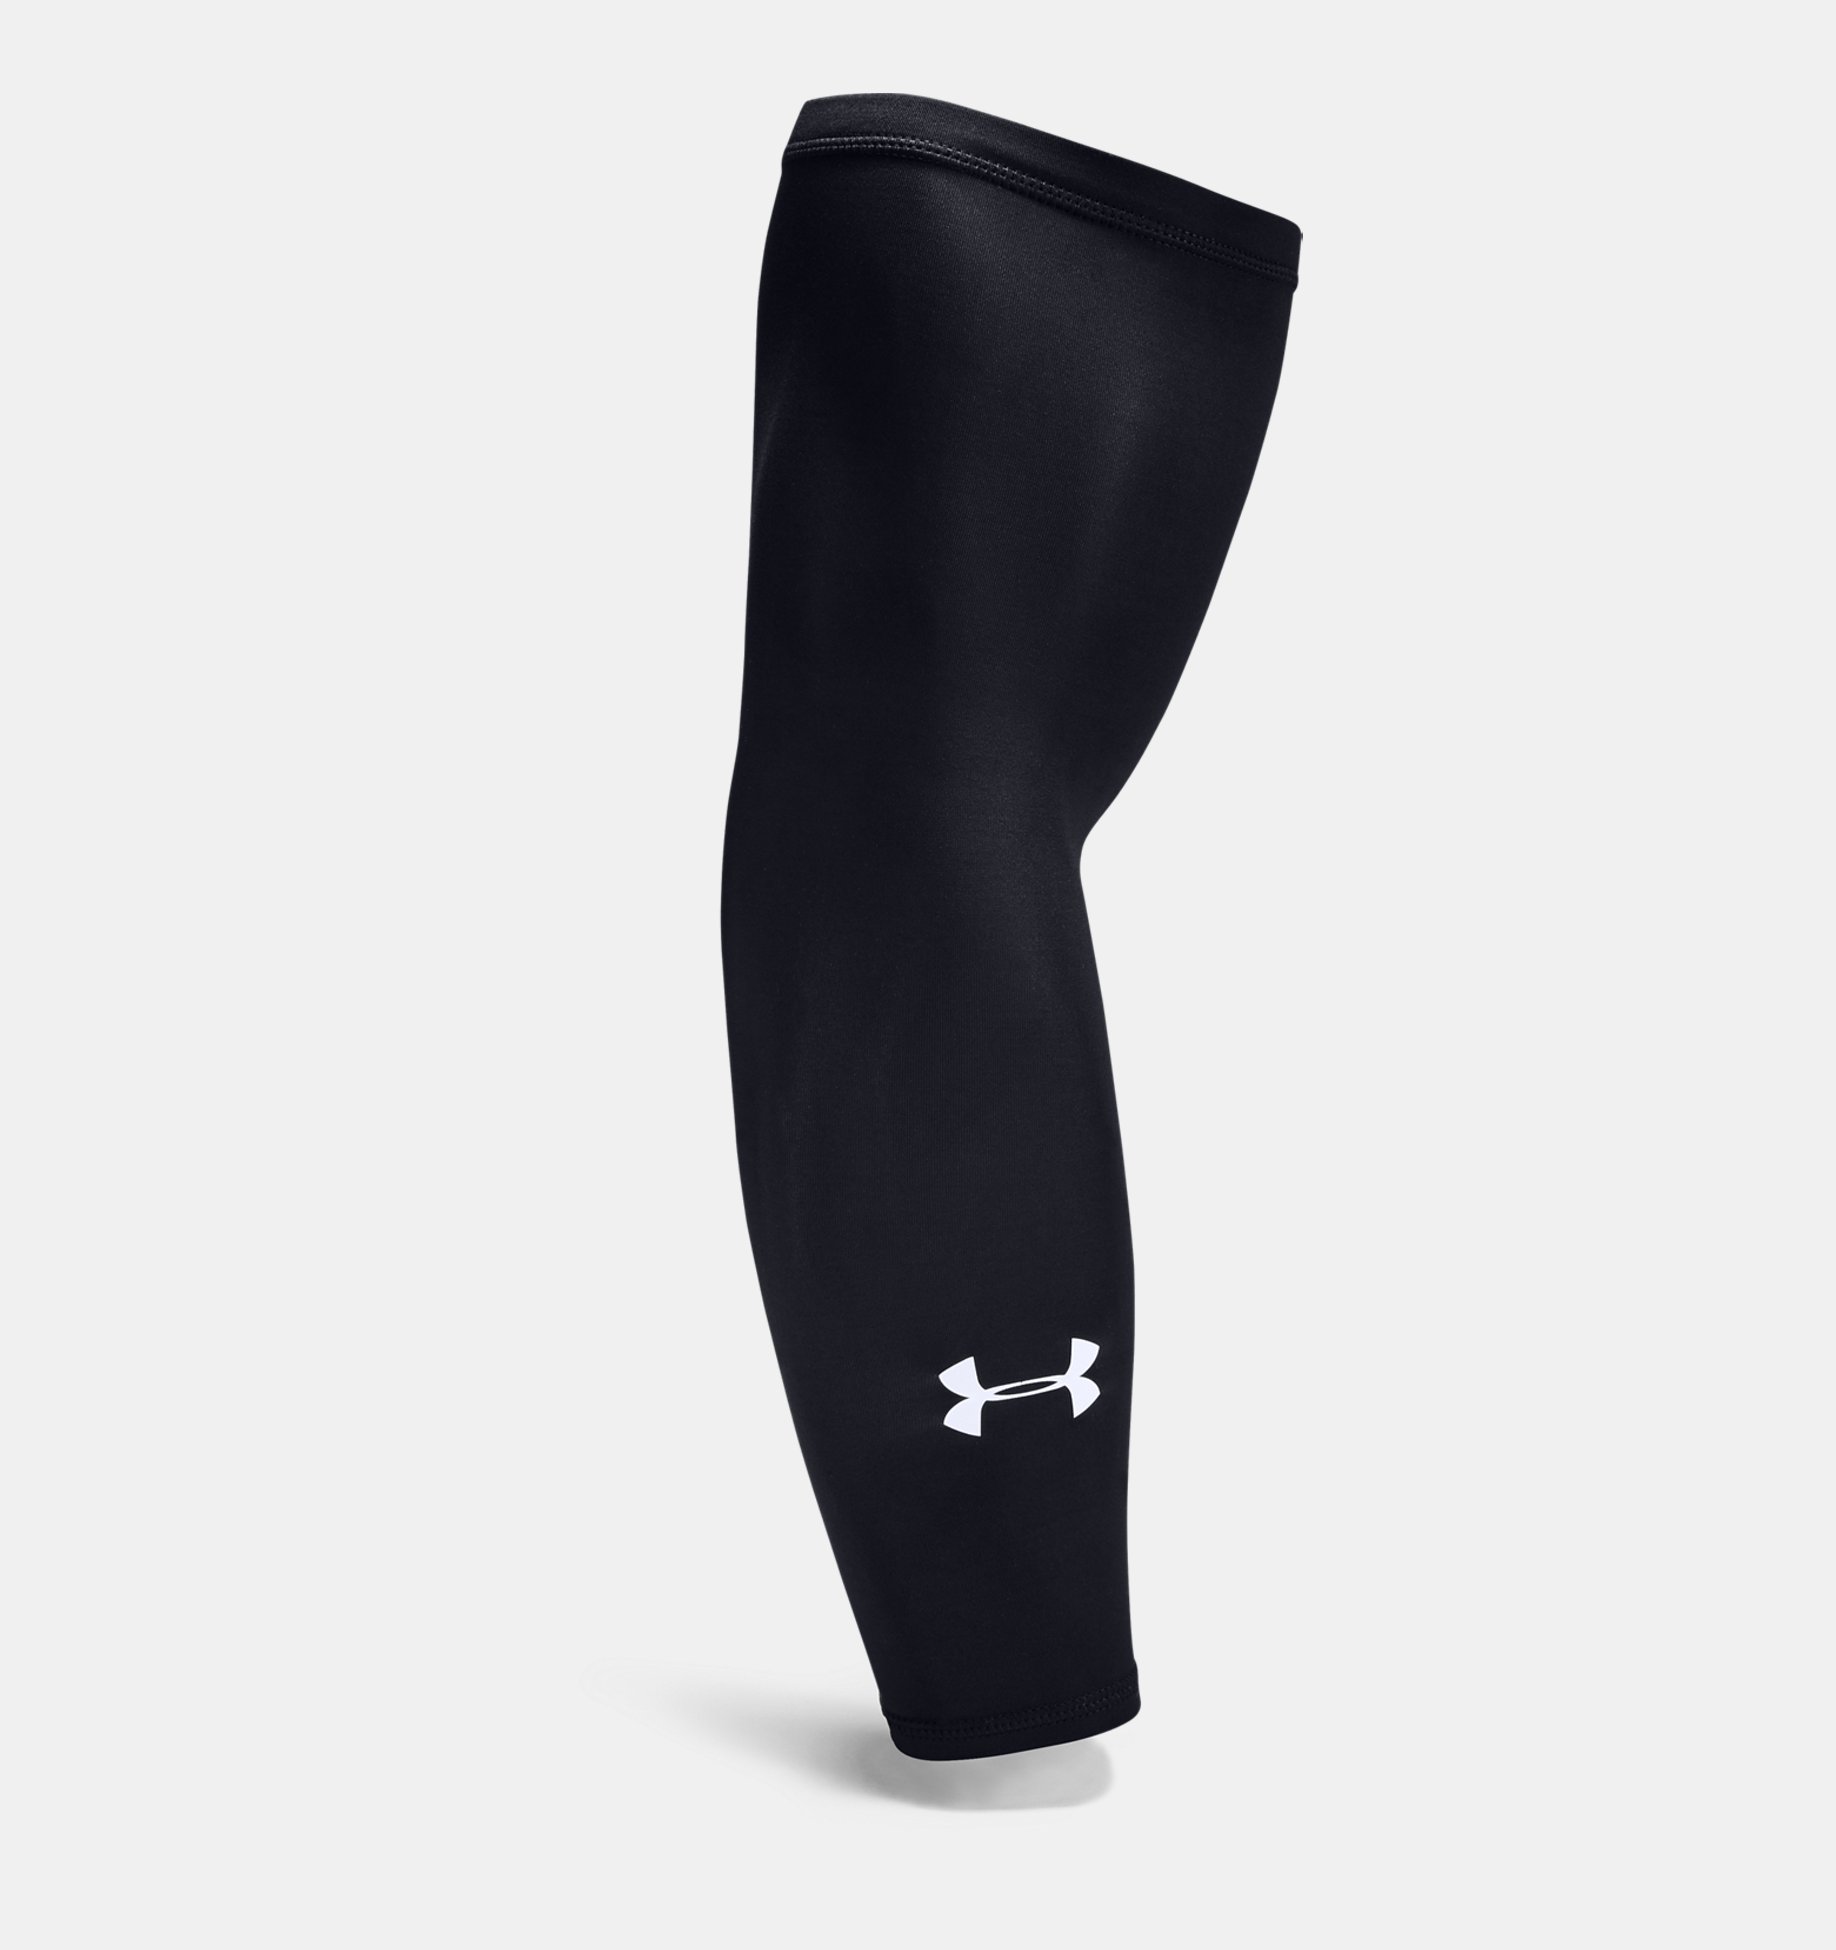 New Under Armour 2 Coolswitch Arm Sleeves Black Size S/M 